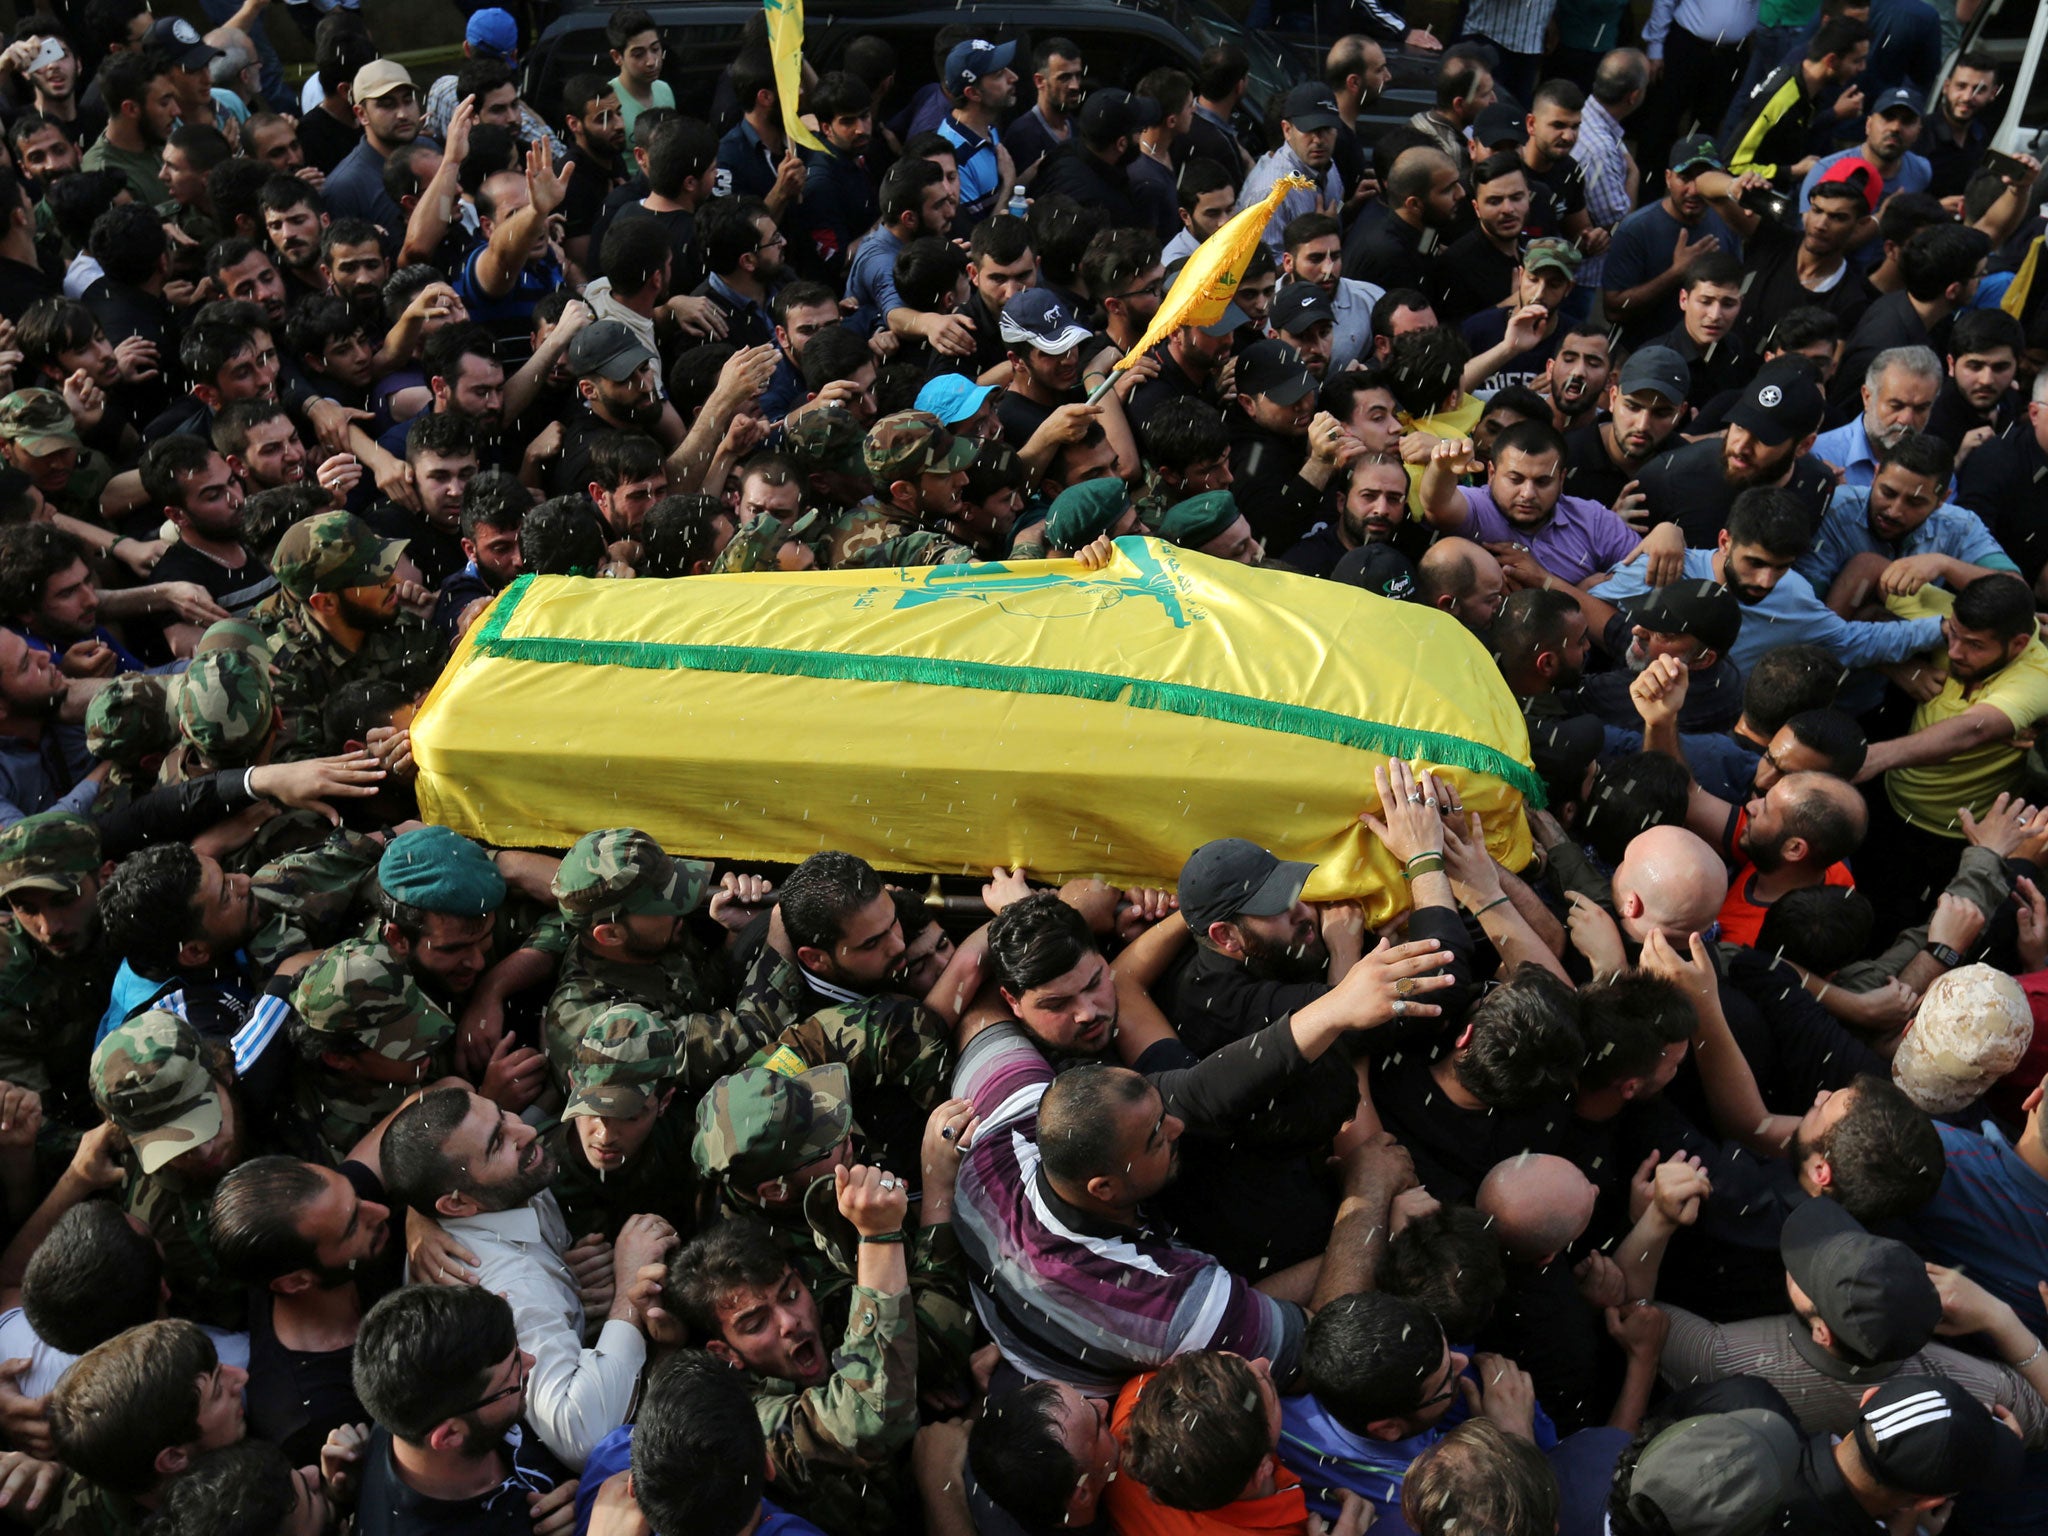 Rice is thrown as Hezbollah members carry the coffin of top Hezbollah commander Mustafa Badreddine, who was killed in an attack in Syria, during his funeral in Beirut's southern suburbs